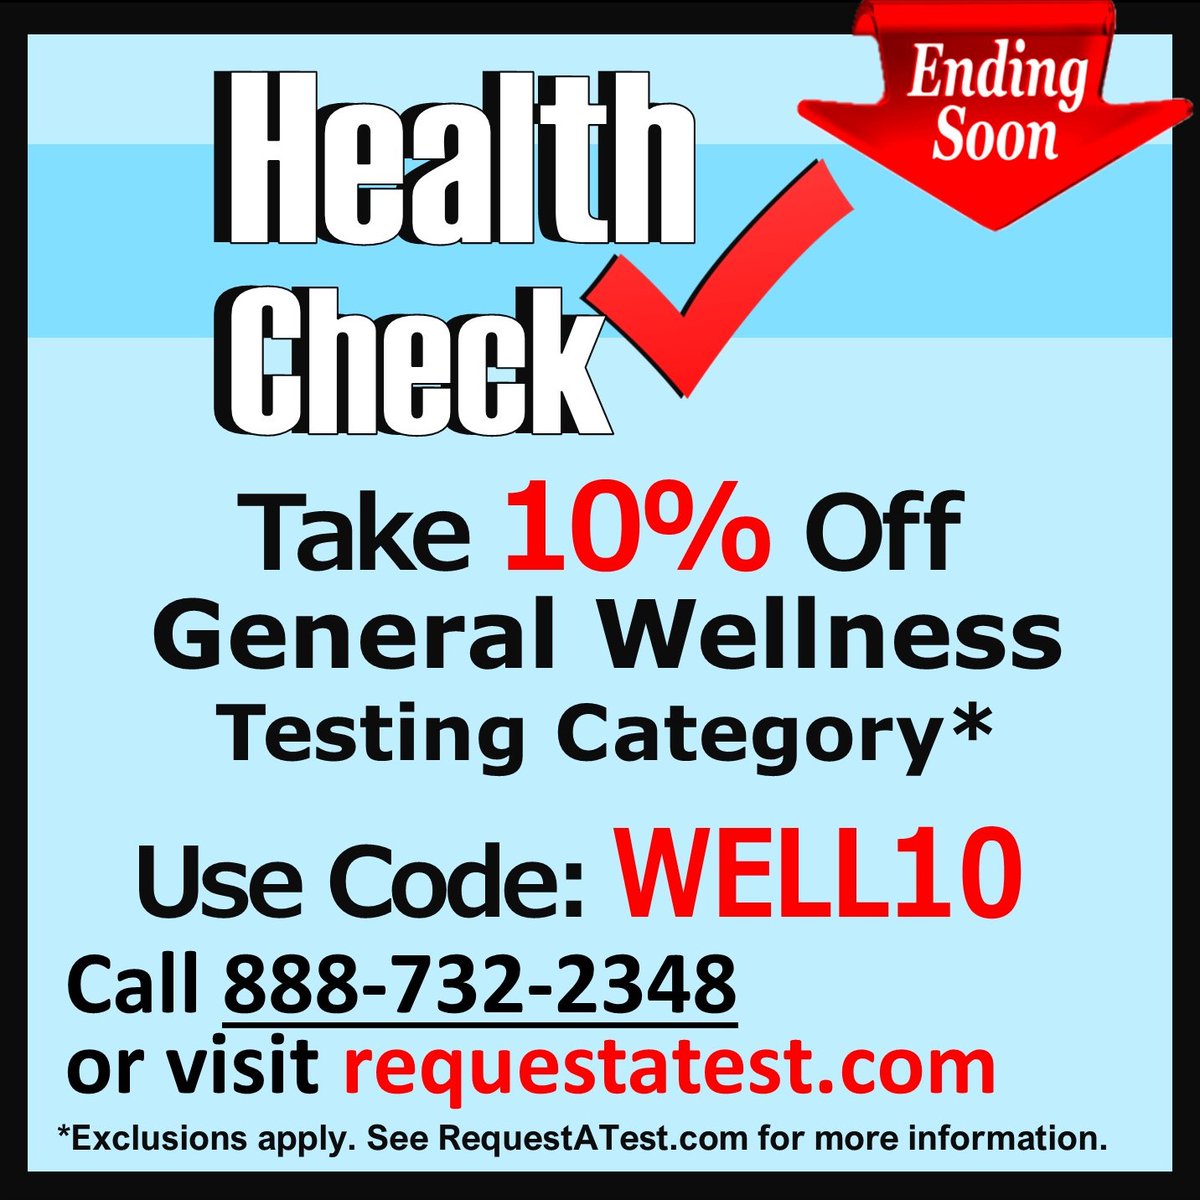 Ending Soon!! Start your New Year with a Health Check, take 10% off our General Wellness Testing Category!

Call 1-888-732-2348 or visit RequestATest.com

 #bloodtest #bloodtesting #healthcheck #healthcheckup #newyear #healthyyou #wellnesscheck #womenshealth